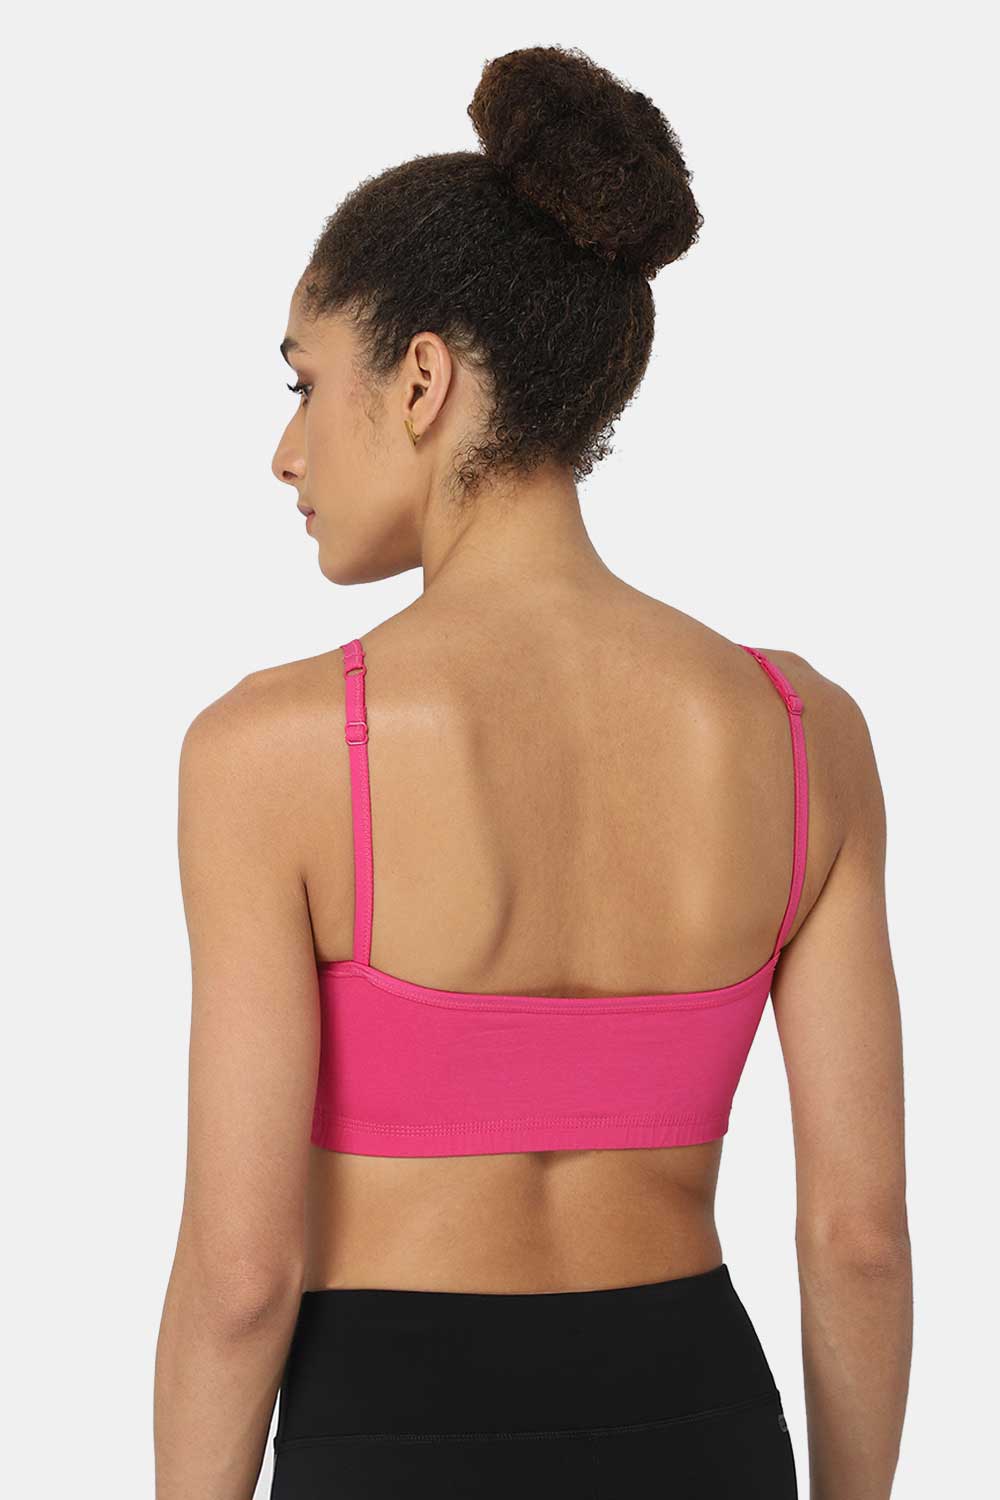 Non-Wired Intimacy Beginners Bra - Pink